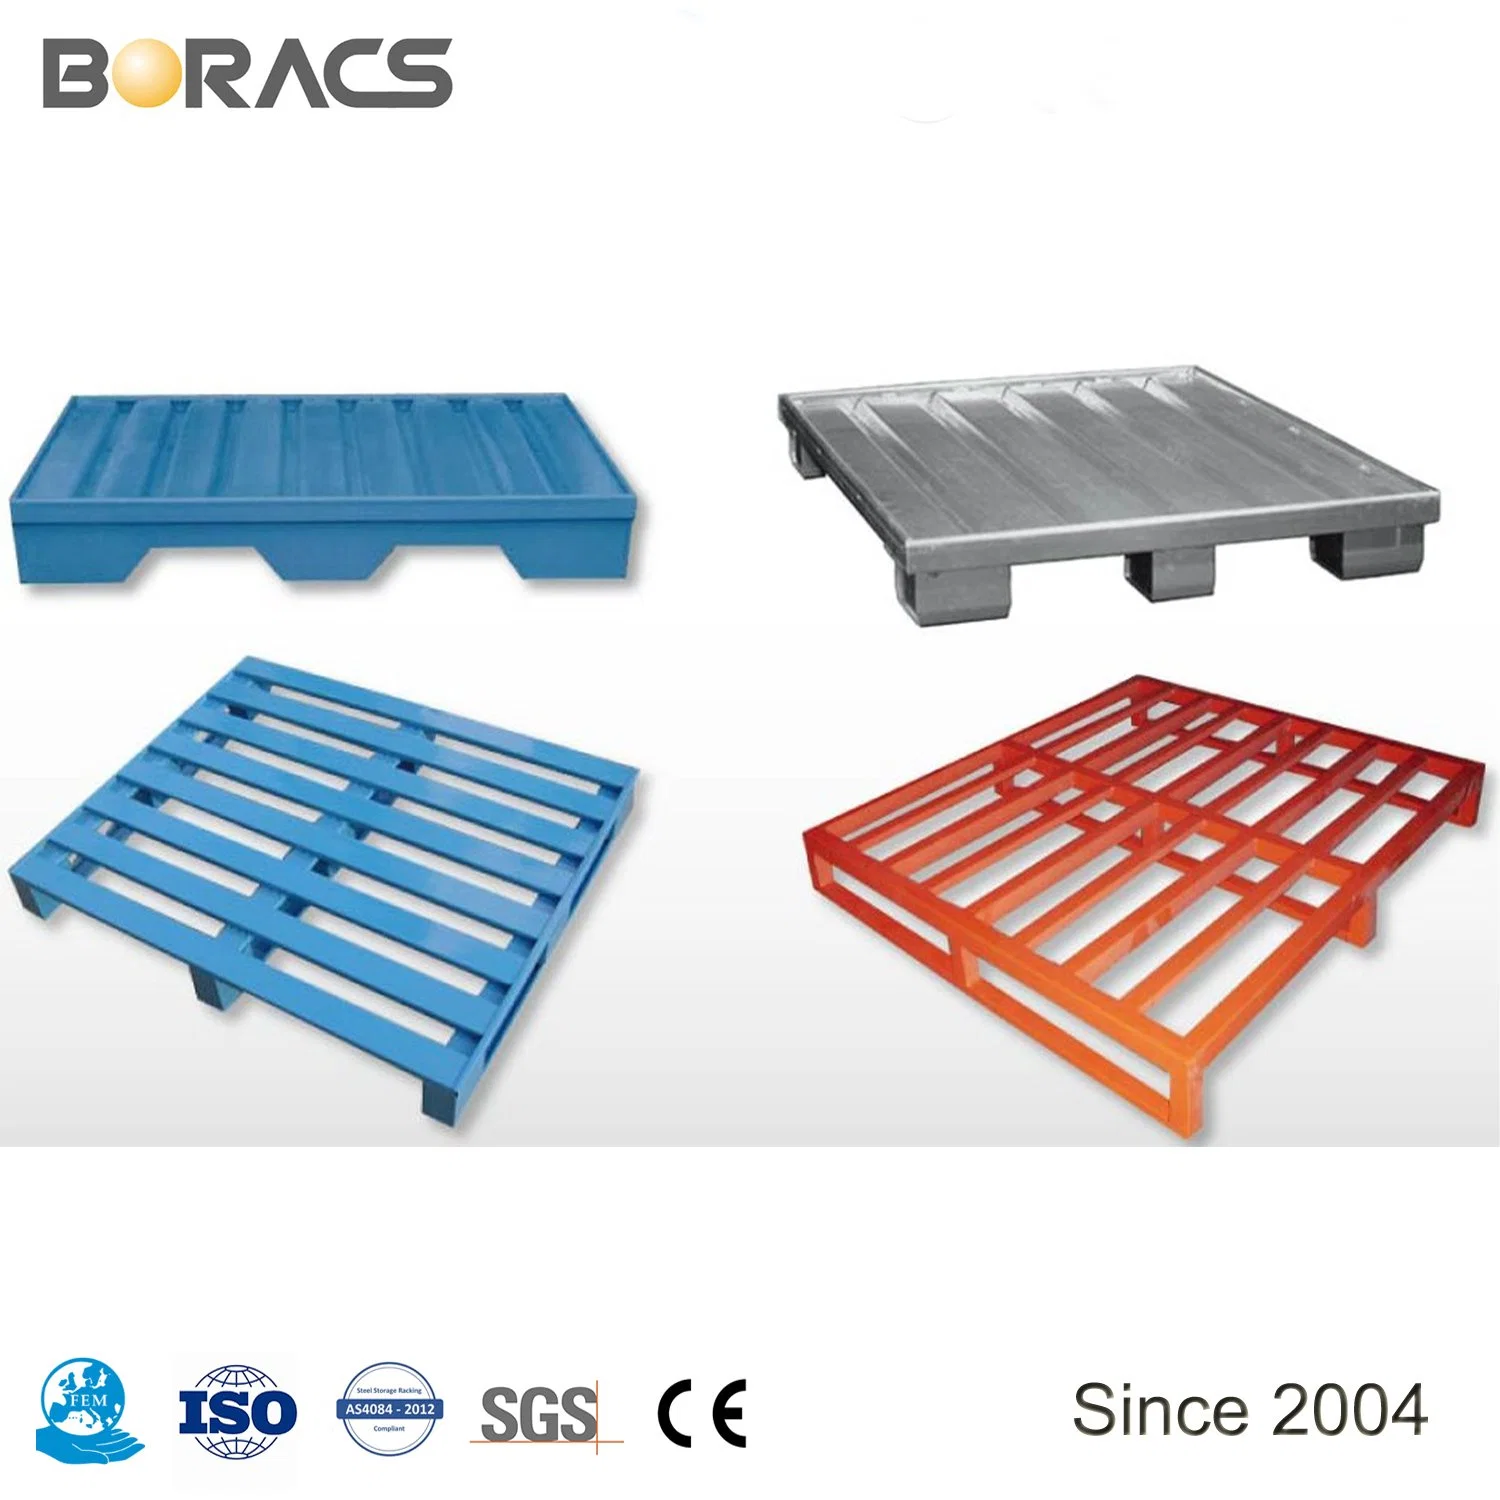 Customized Galvanized & Powder Coating Steel Pallets for Forklift